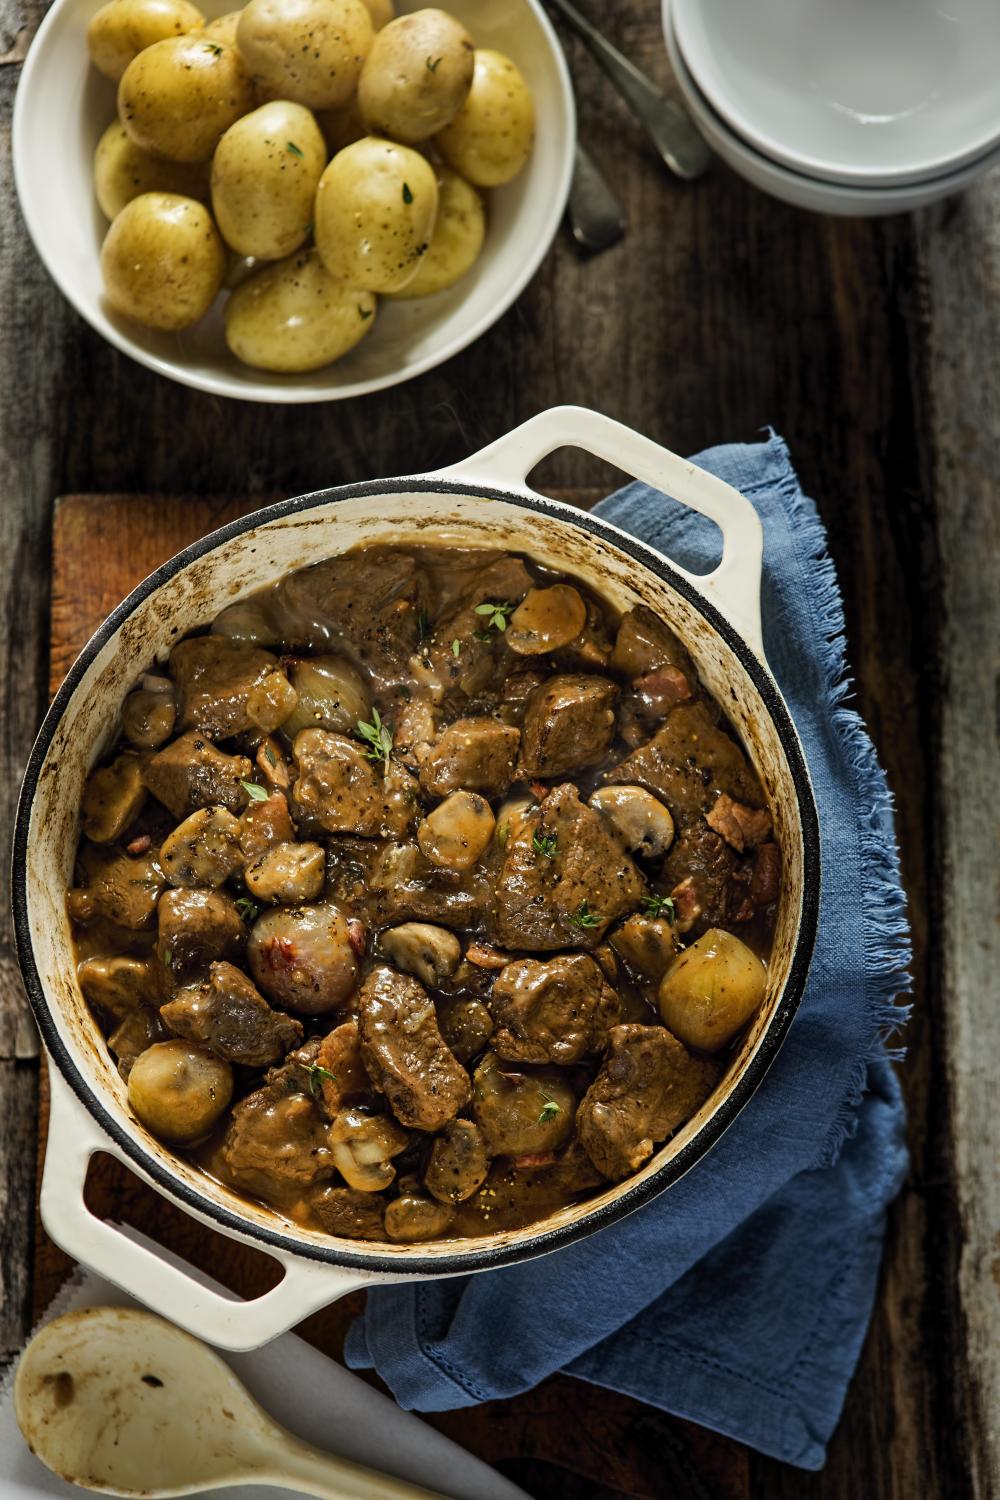 4-Beef-stout-stew (1) (1)